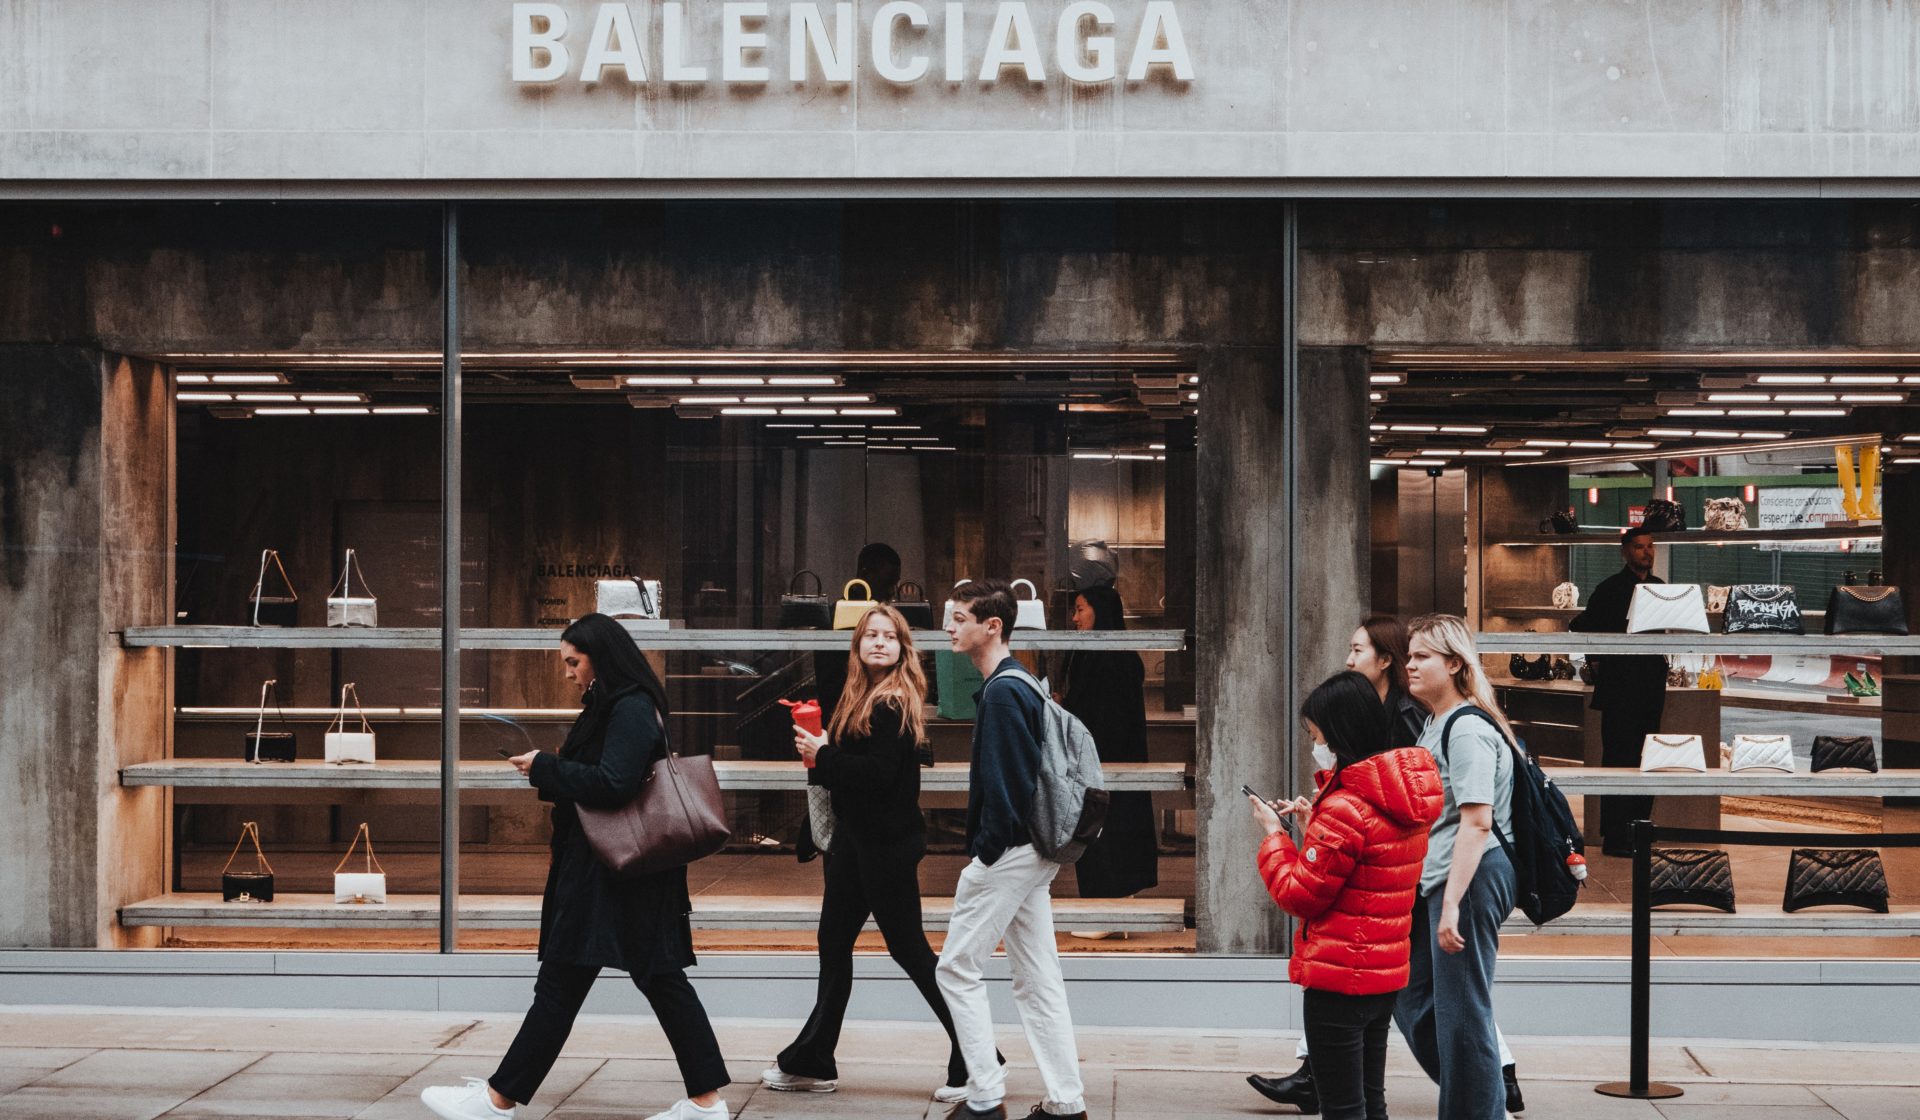 Balenciaga’s quest for redemption has had the opposite effect